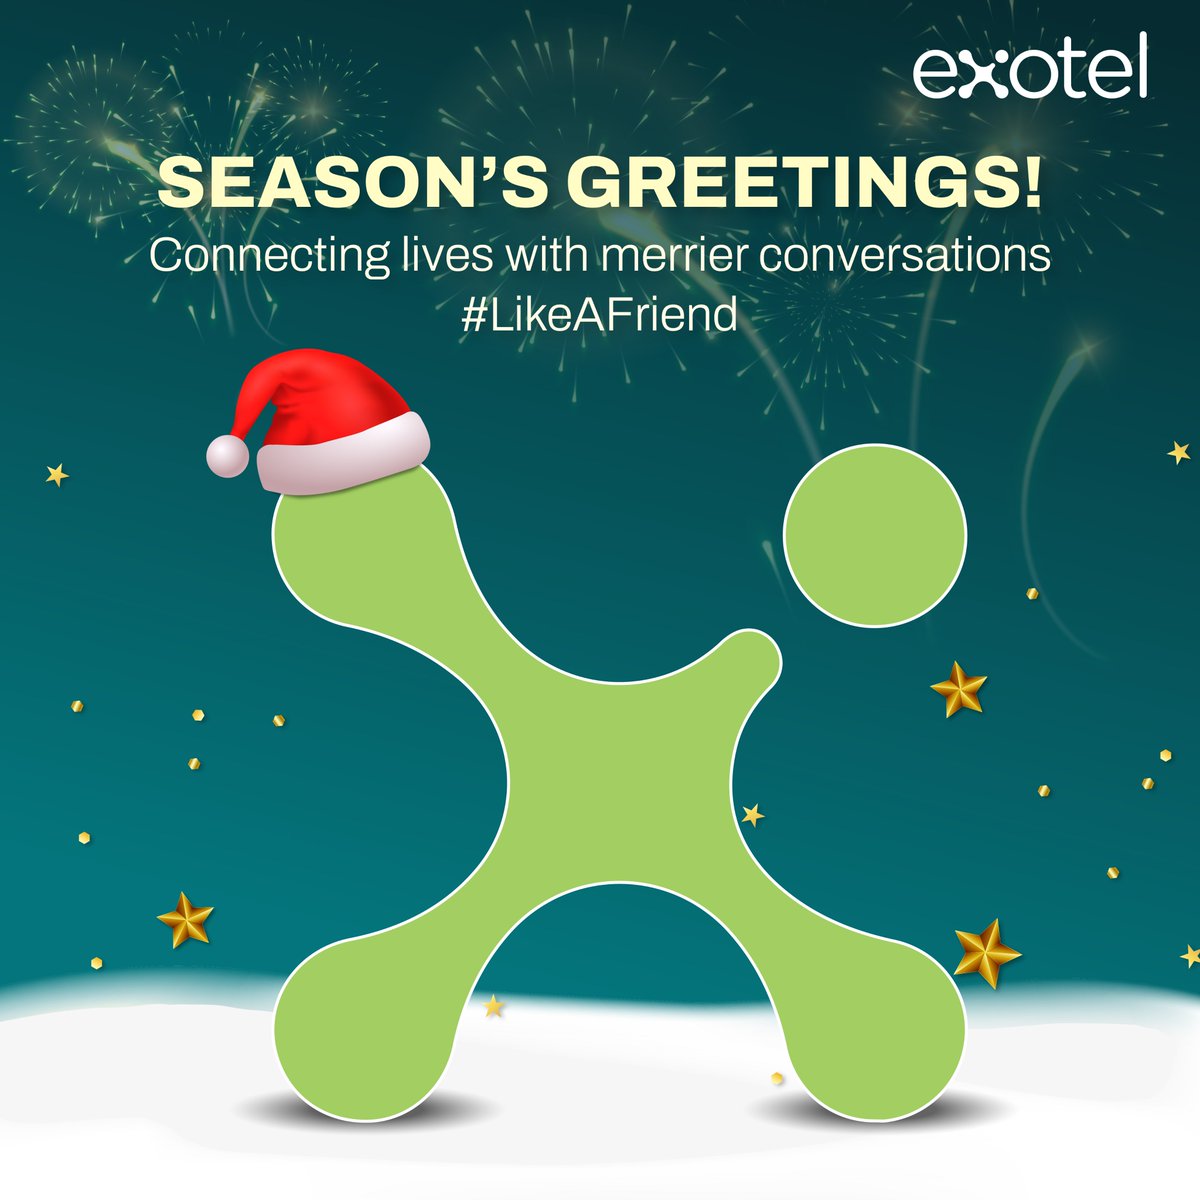 Merry Christmas from all of us at Exotel 🎄 As we connect lives through connected conversations, we wish all our customers, partners, and #TeamExotel a festive season filled with joy & warmth. May your holidays be as merry and bright as the conversations that bring us closer.